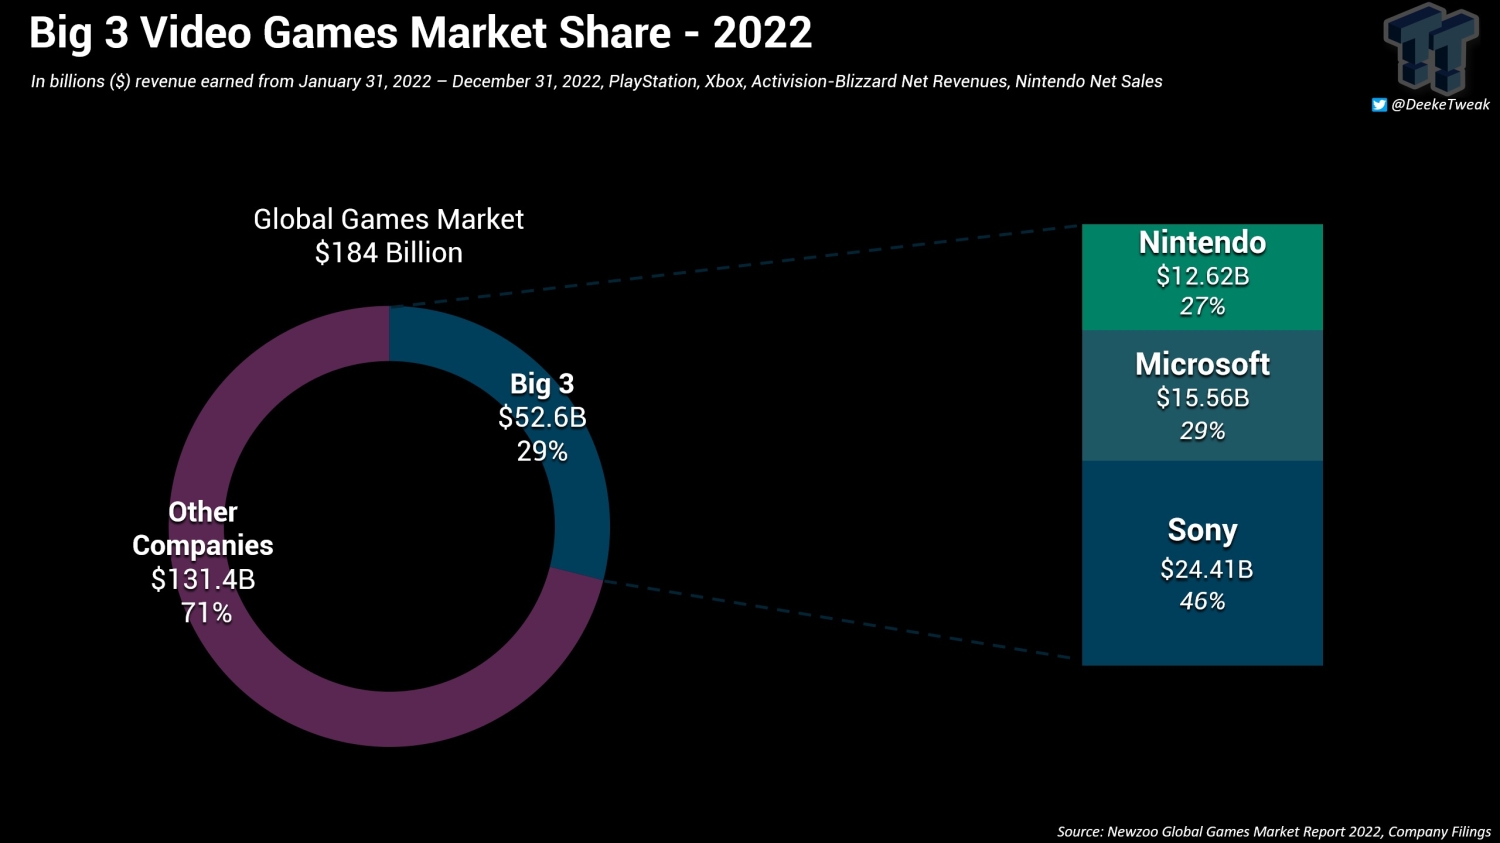 3 market share: PlayStation, Xbox, and Nintendo slightly fluctuate 2022